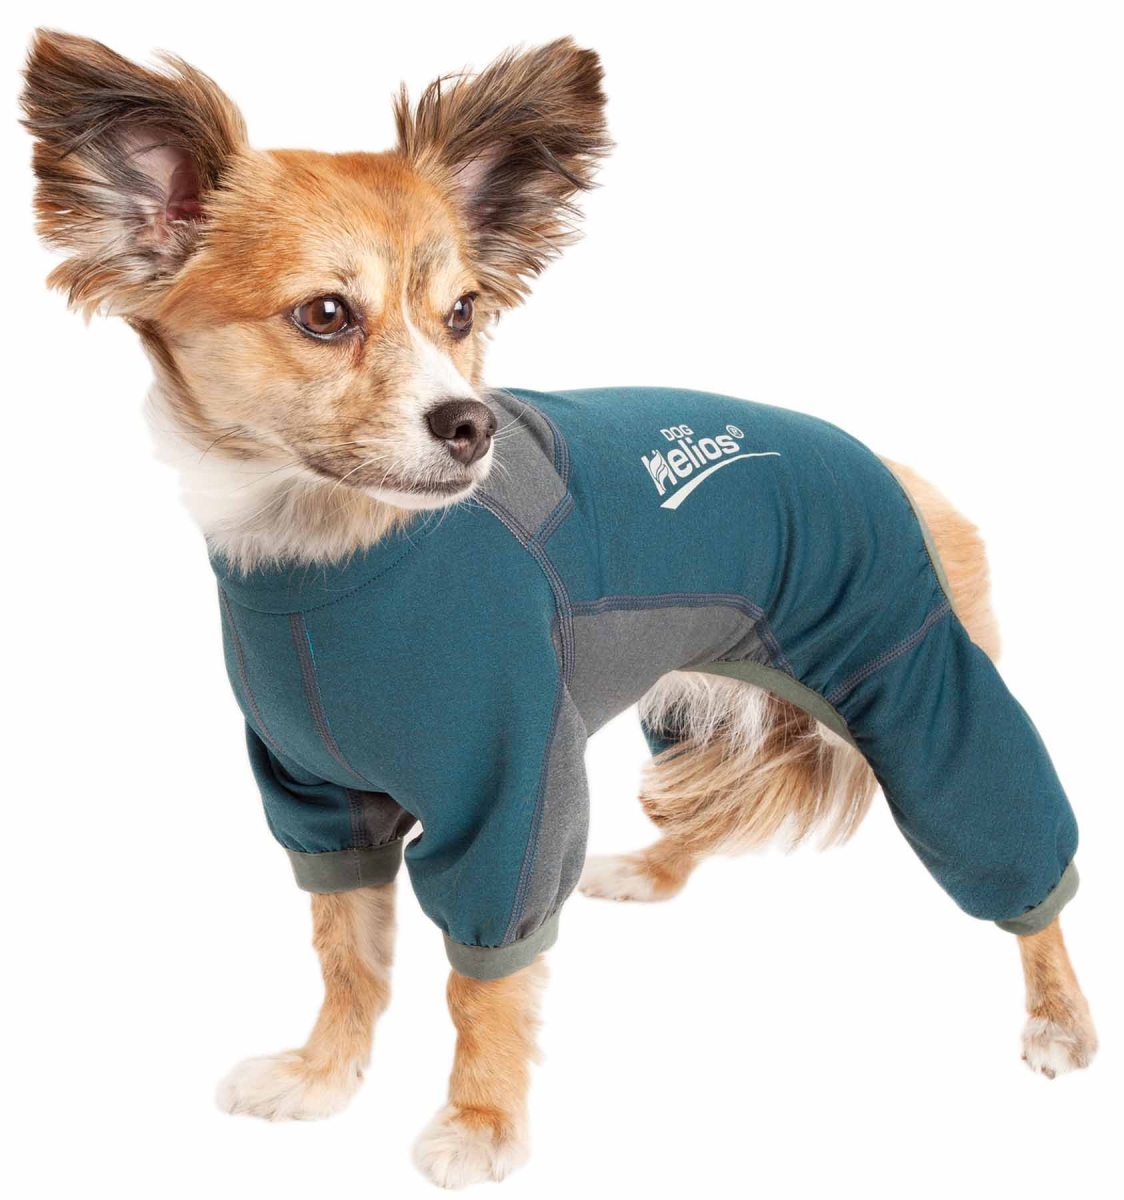 Yghl8blxs Rufflex 4-way-stretch Breathable Full Bodied Performance Dog Warmup Track Suit - Blue & Grey, Extra Small